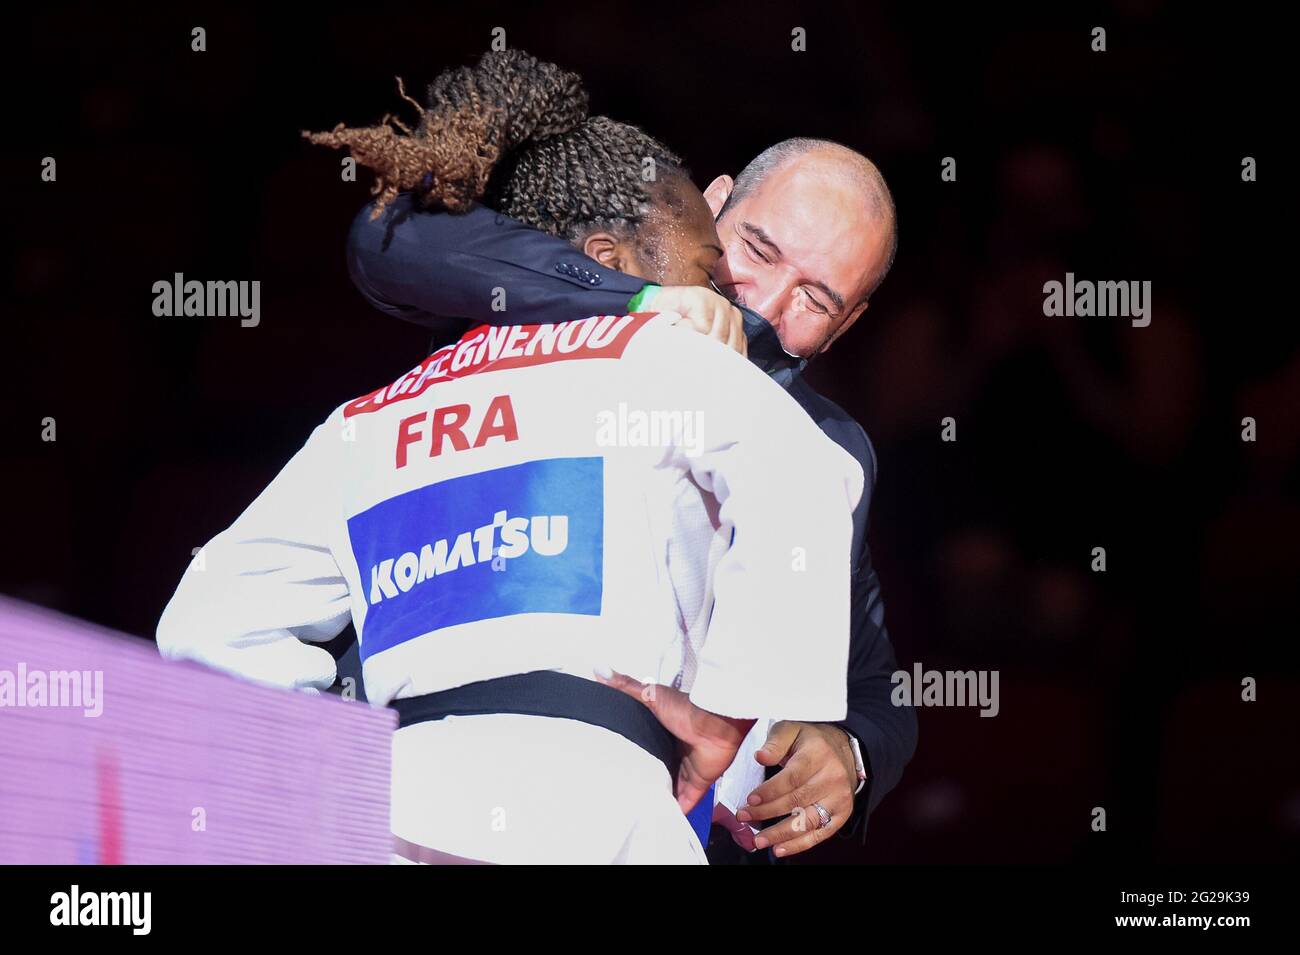 BUDAPEST, HUNGARY - JUNE 9:  during the World Judo Championships Hungary 2021 at Papp Laszlo Budapest Sports Arena on June 9, 2021 in Budapest, Hungary (Photo by Yannick Verhoeven/Orange Pictures) Stock Photo